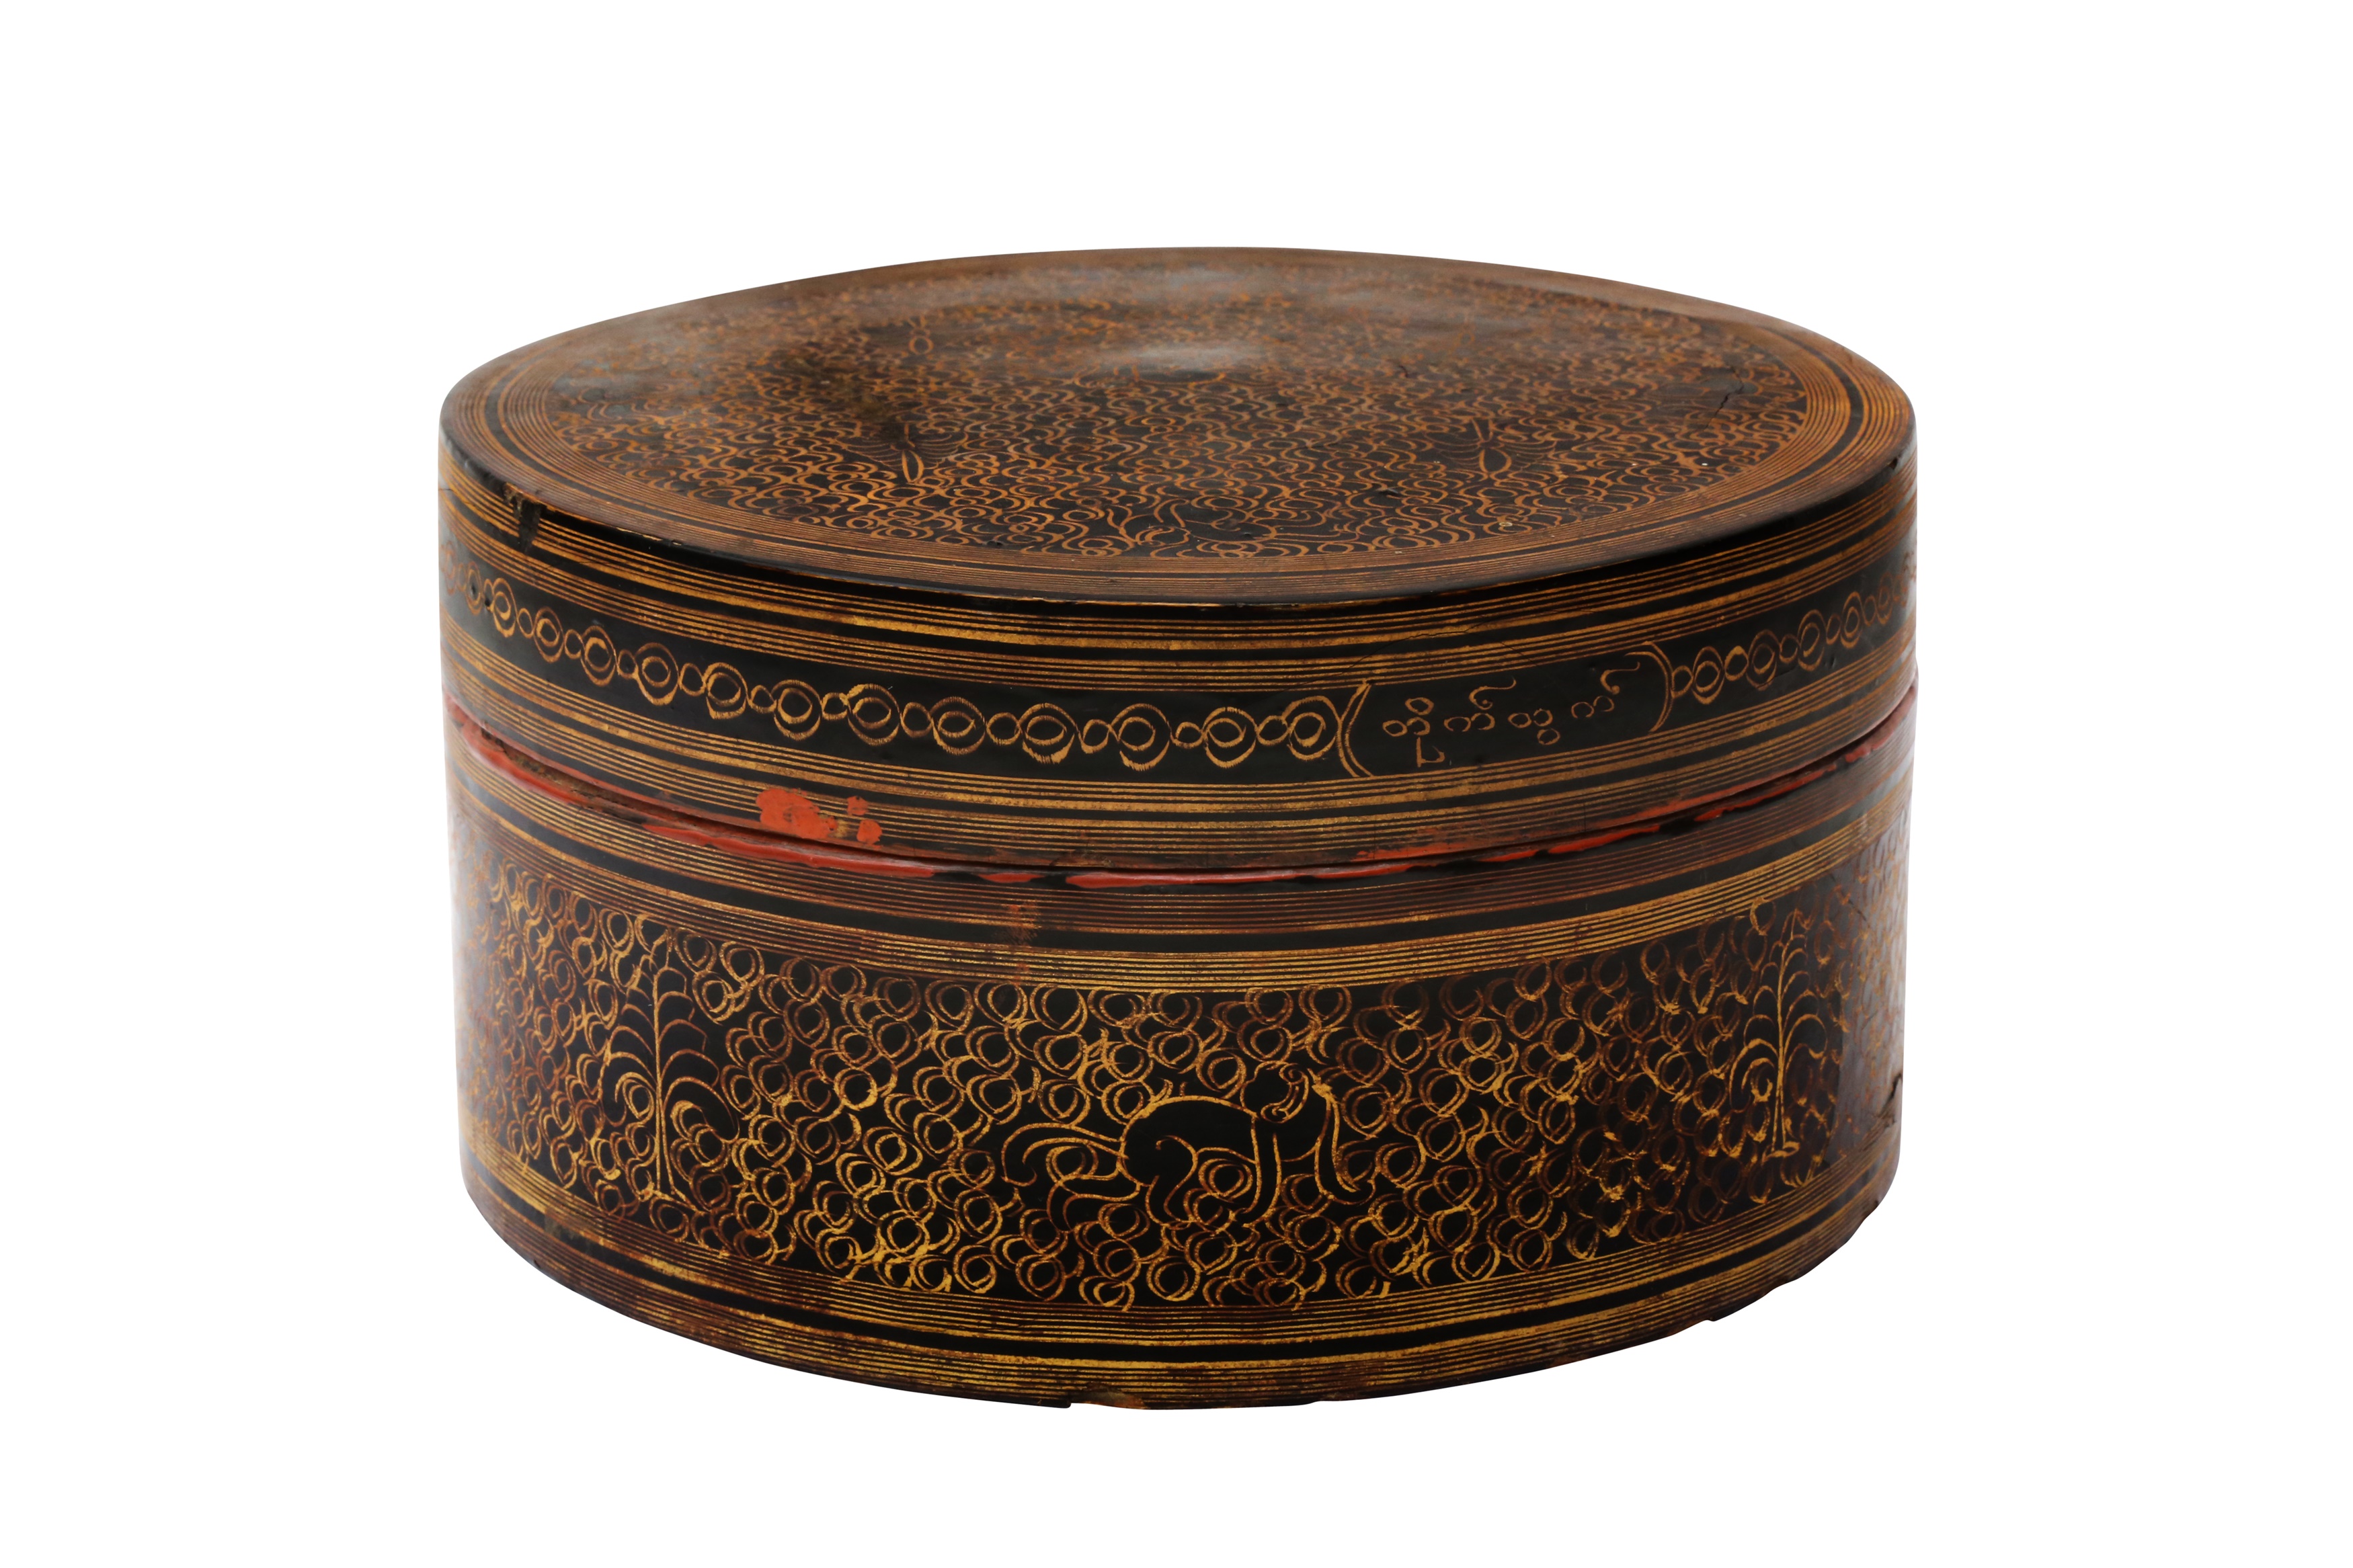 A BURMESE RED AND BLACK LACQUER 'MYTHICAL CREATURE' BETEL-BOX AND COVER OFFERED ON BEHALF OF